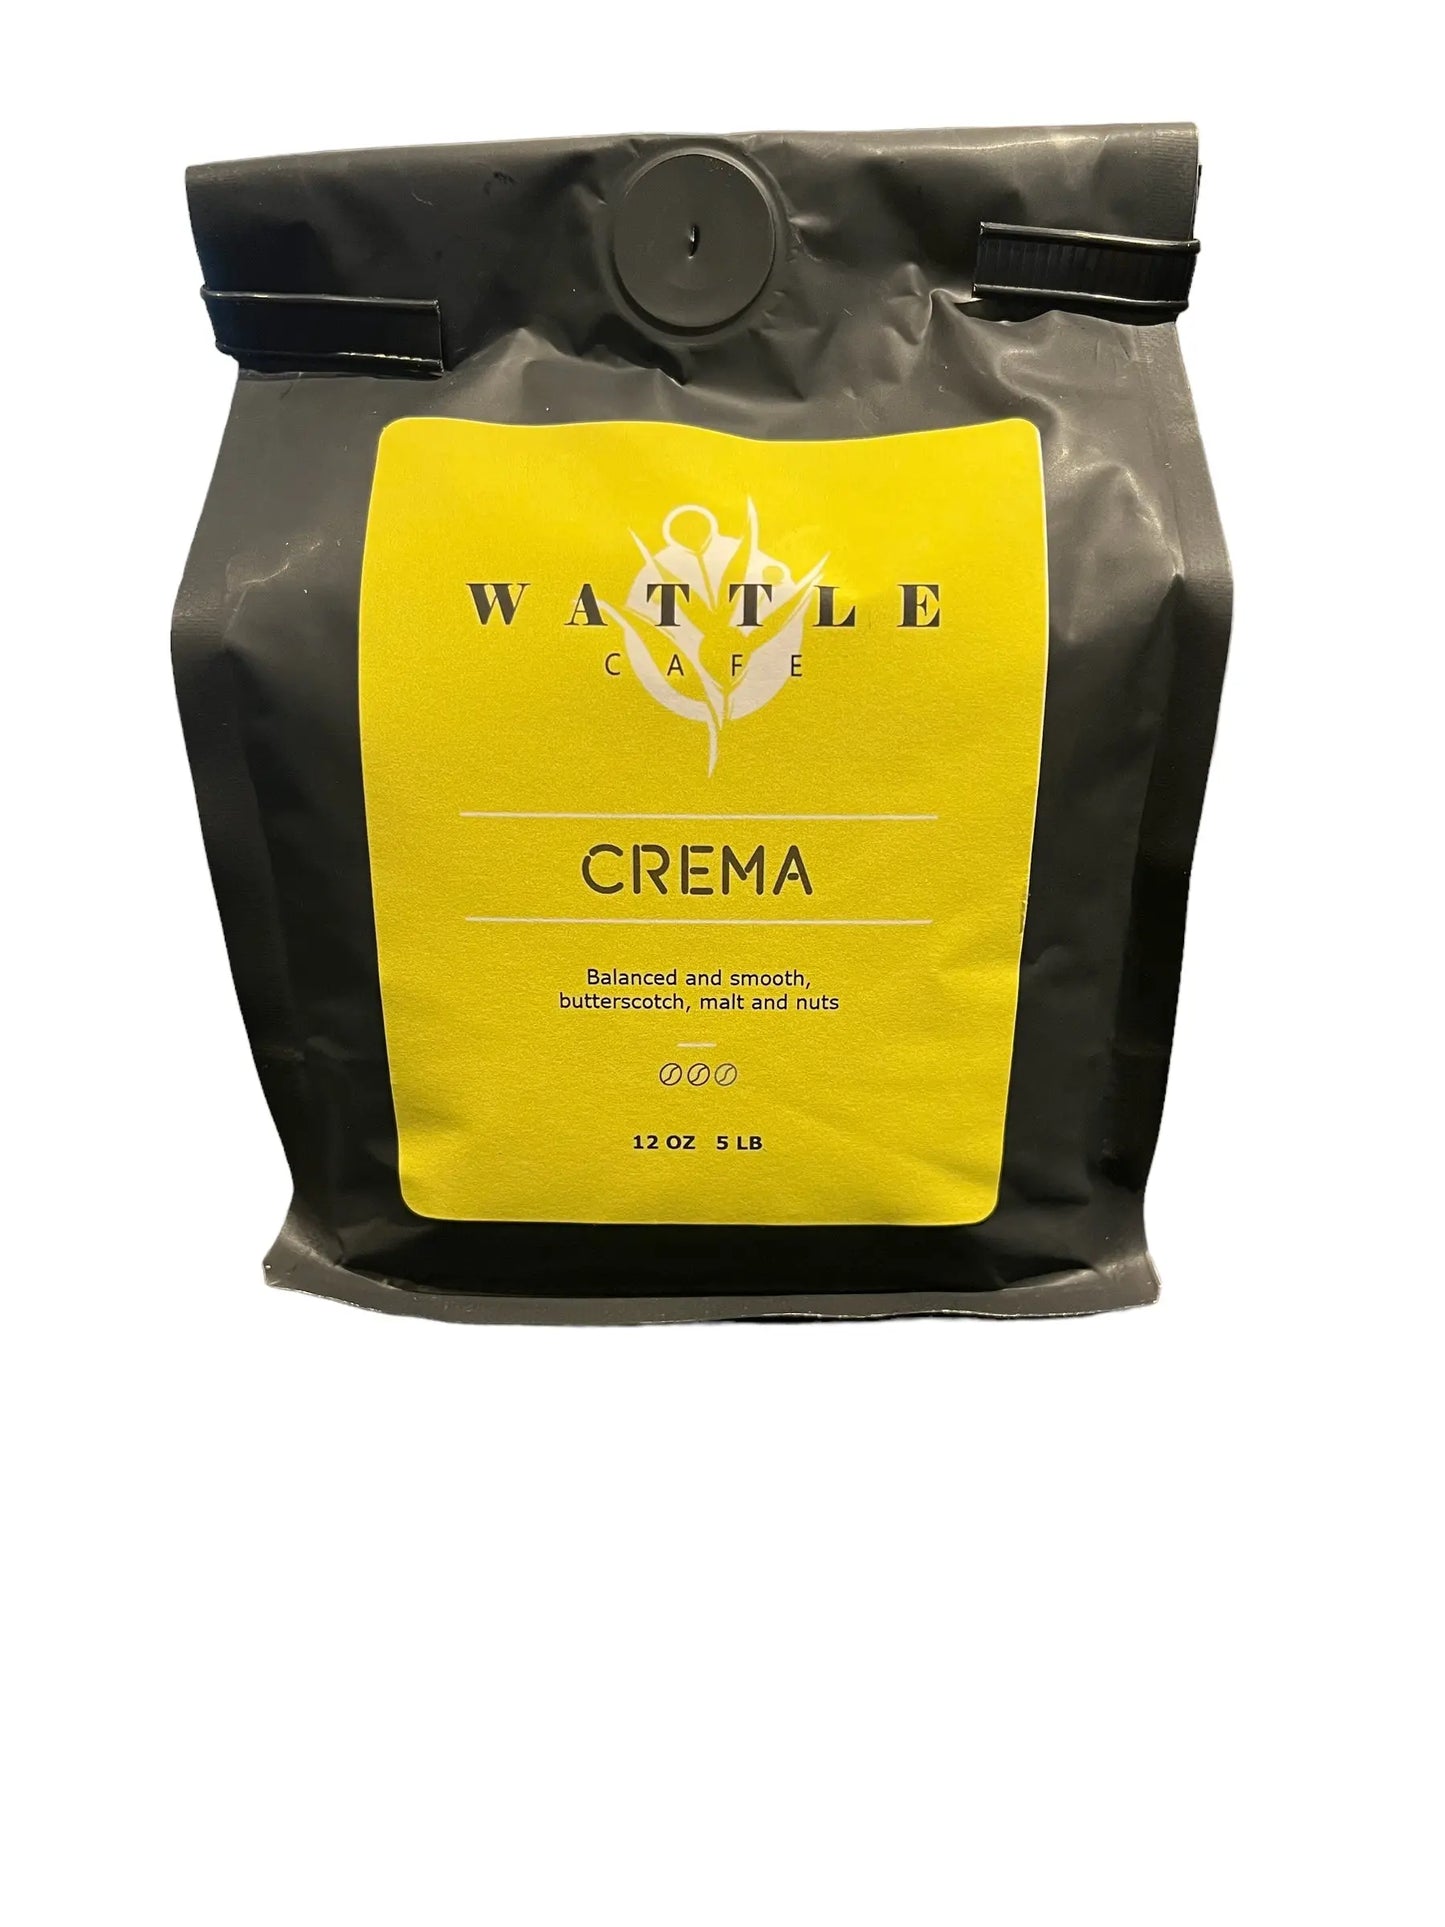 Wattle Cafe retail coffee bag front on white background